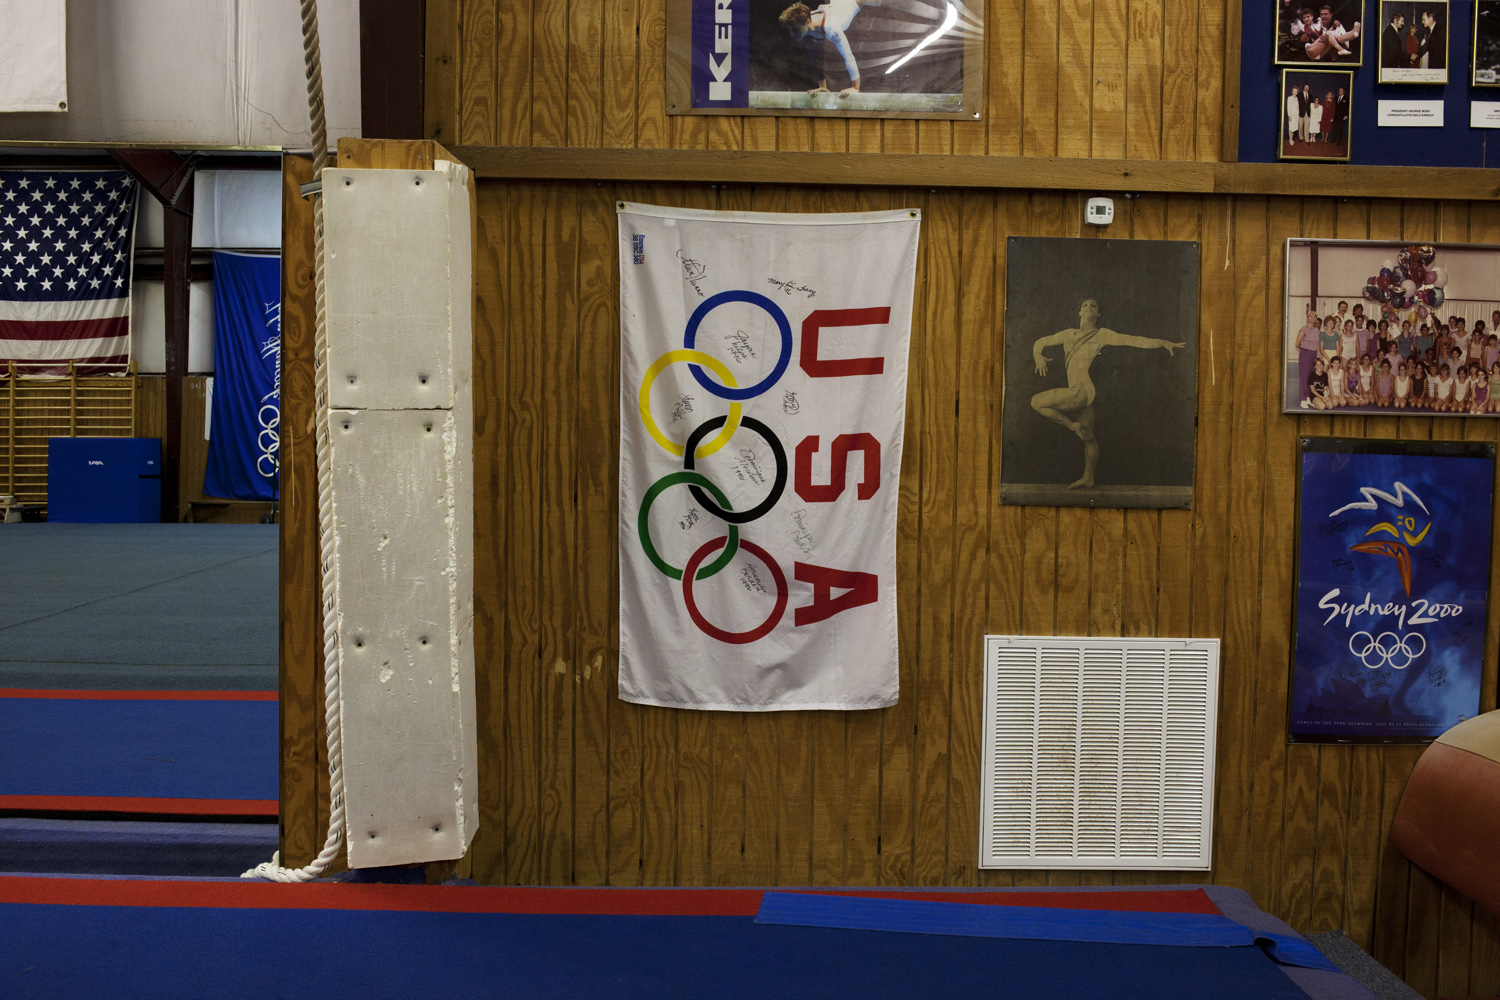 A wall displays mementos from past Olympians groomed for victory at Karolyi's Camp.